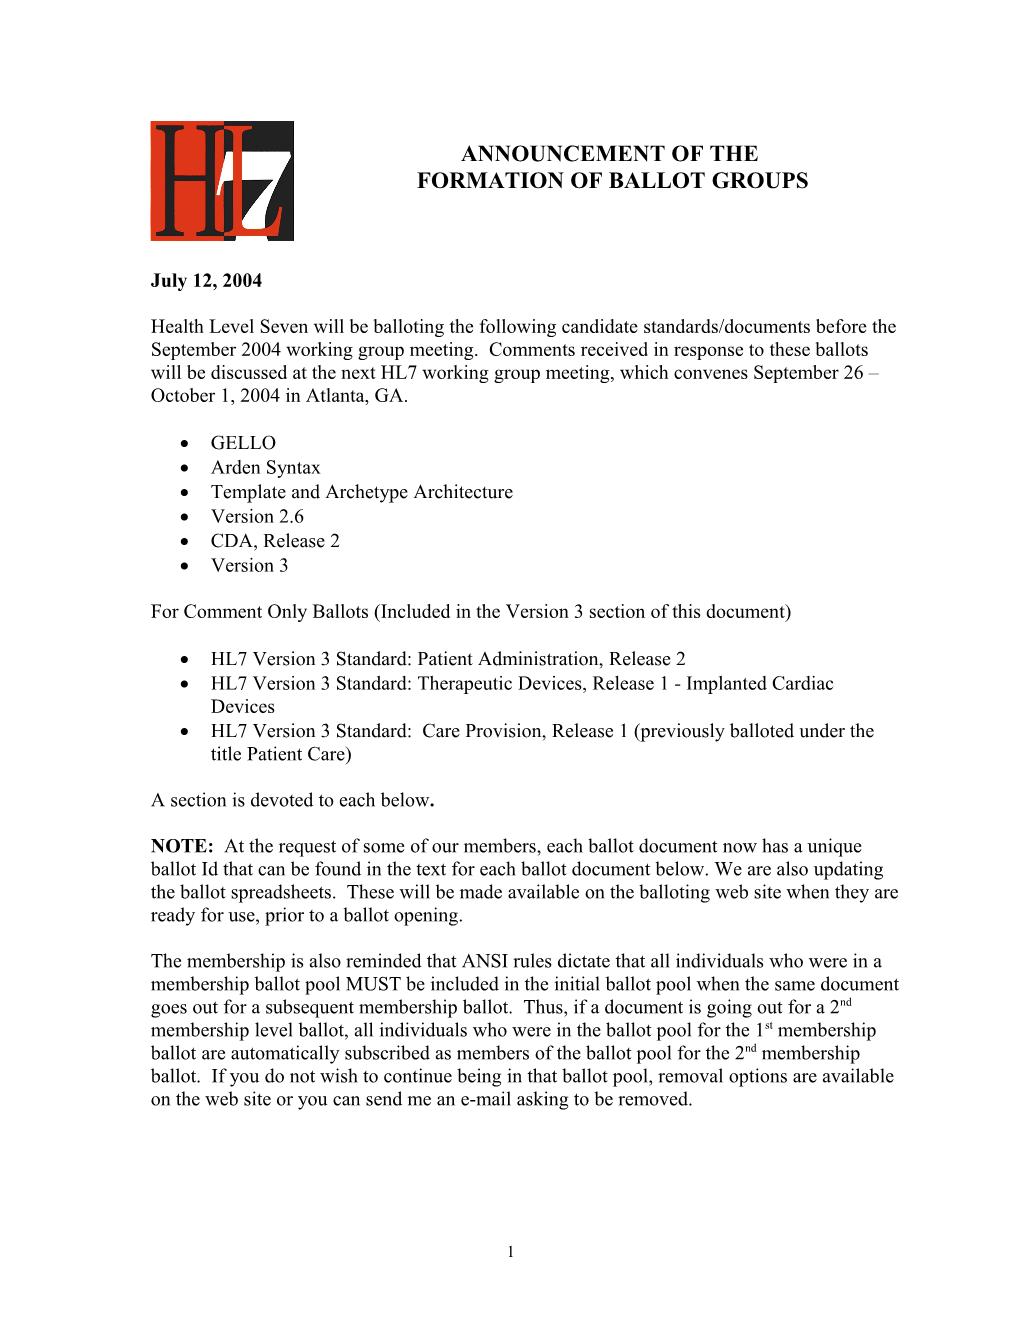 For Comment Only Ballots (Included in the Version 3 Section of This Document)